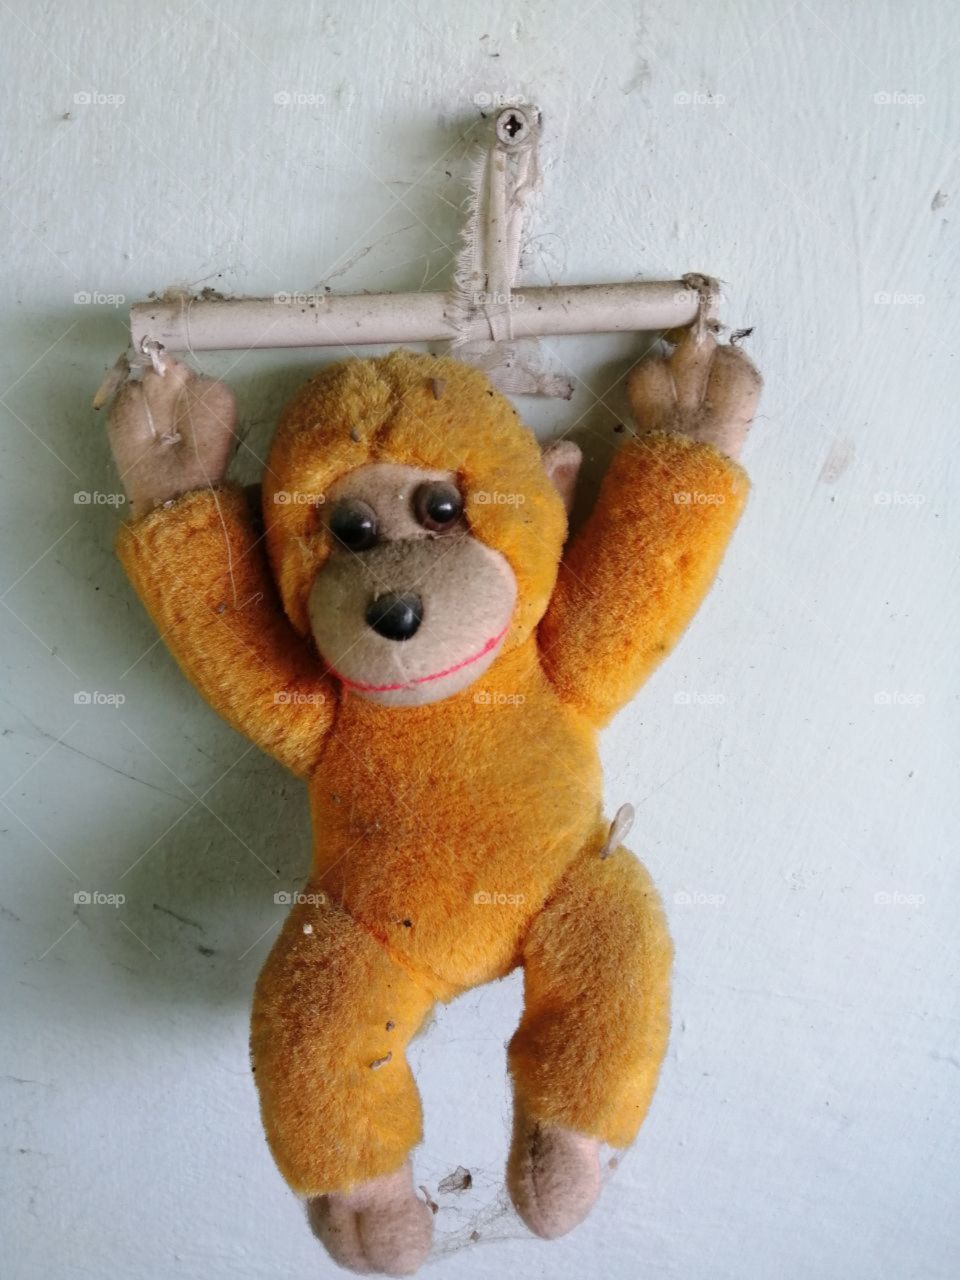 Old dirty soft toy orange monkey with his hands up on a stick